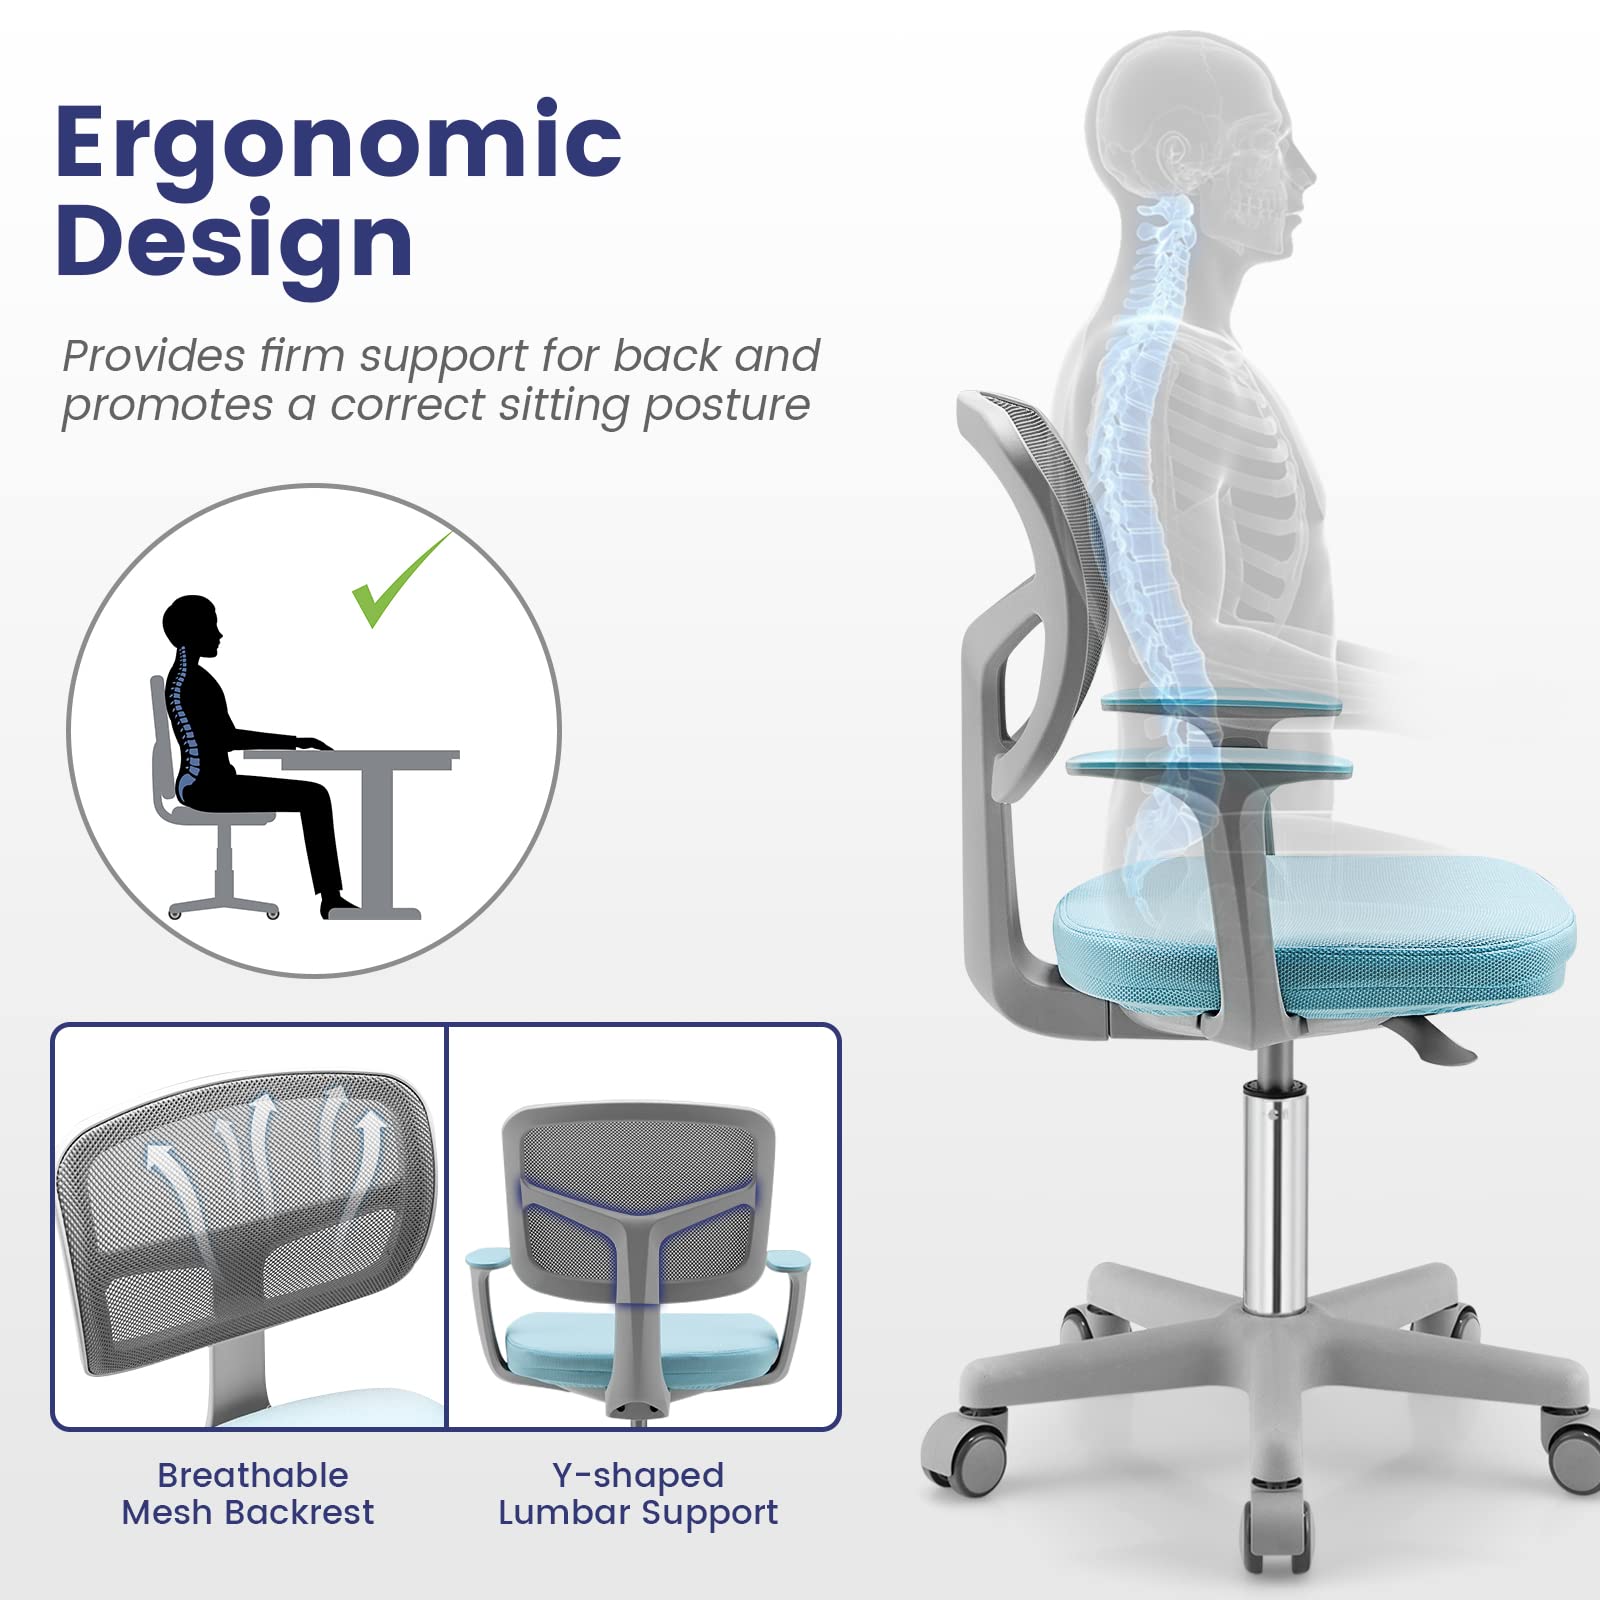 Giantex Ergonomic Home Office Chair, Mesh Low Back Desk Chair, Swivel Computer Chair with Y-Shaped Lumbar Support & Comfy Armrest